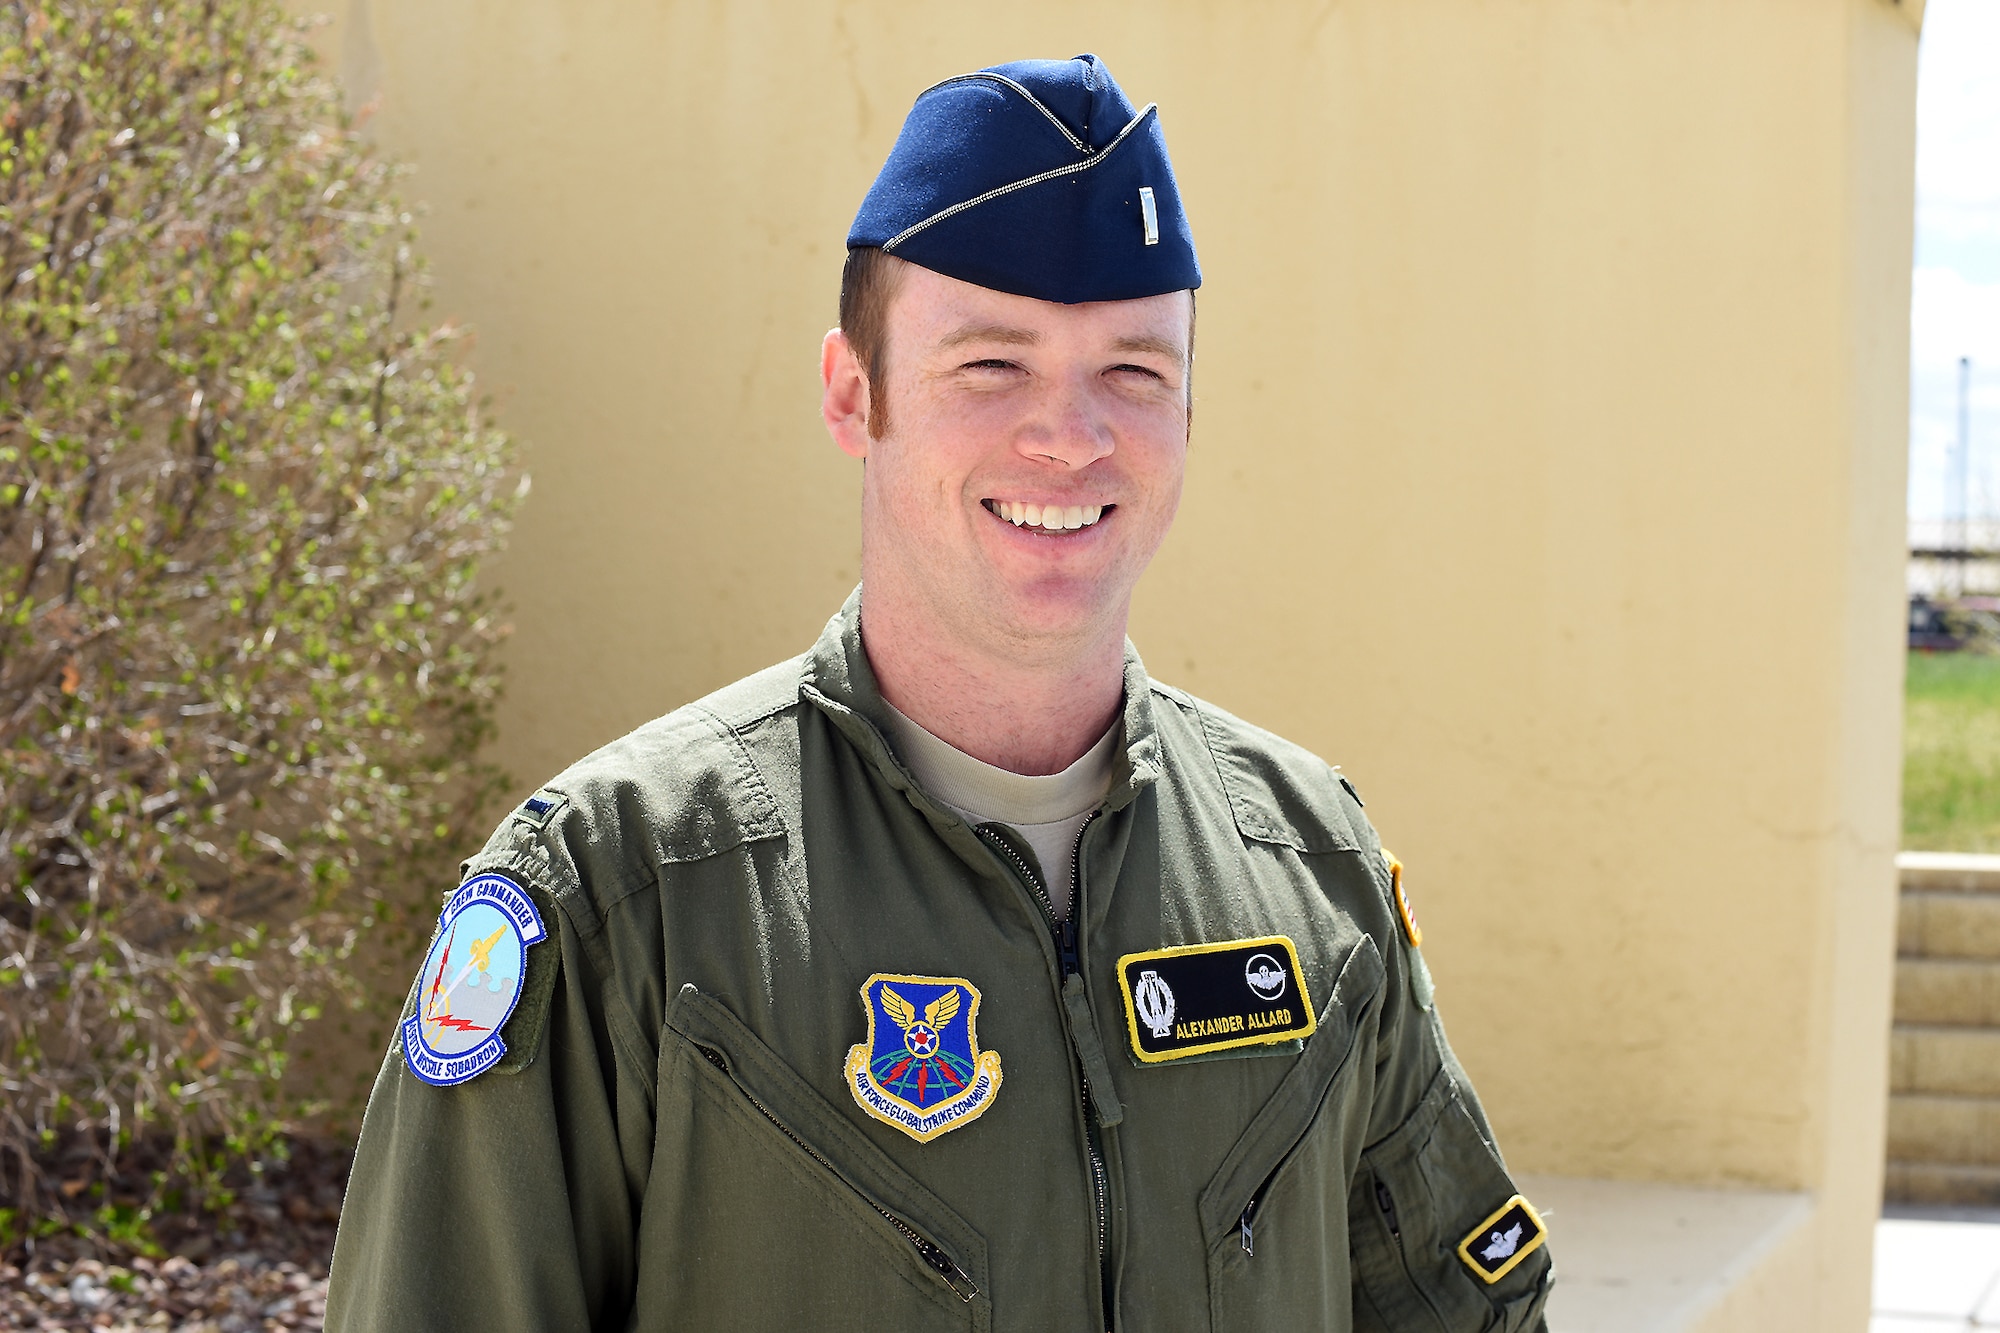 1st Lt. Alexander “Ara” Allard, 490th Missile Squadron missile squadron safety officer and assistant flight commander, poses at the 341st Missile Wing headquarters building after returning from missile field duty on May 8, 2018, at Malmstrom Air Force Base, Mont. Allard is participating in a pilot program that broadens safety knowledge and practices in intercontinental ballistic missile operations. (U.S. Air Force photo by Kiersten McCutchan)